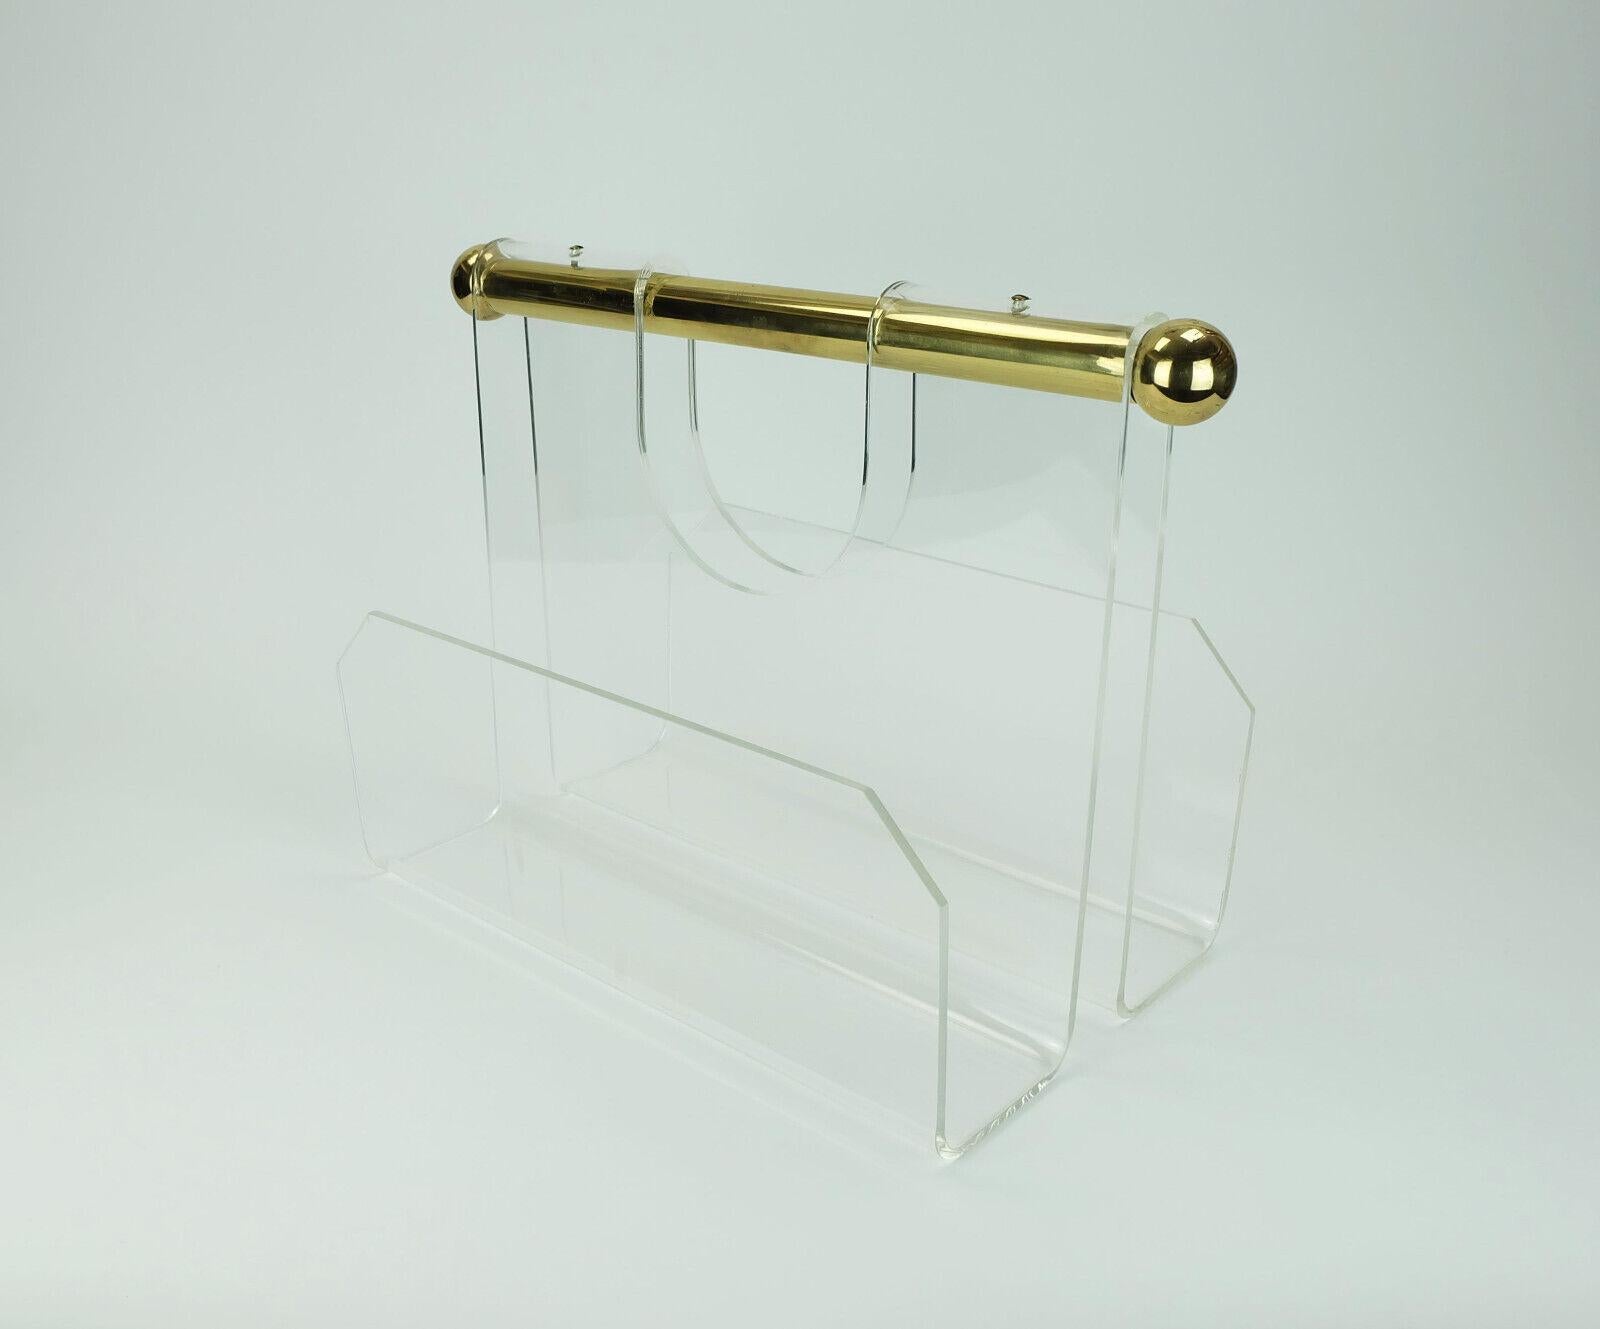 Magazine rack with 2 compartments, made of acrylic with a thick round brass handle.

Dimensions in cm:
Width 40 cm (incl. handle 47 cm), depth 27 cm), height 34 cm, width per compartment 10.5 cm.

Dimensions in inches:
Width 15.74